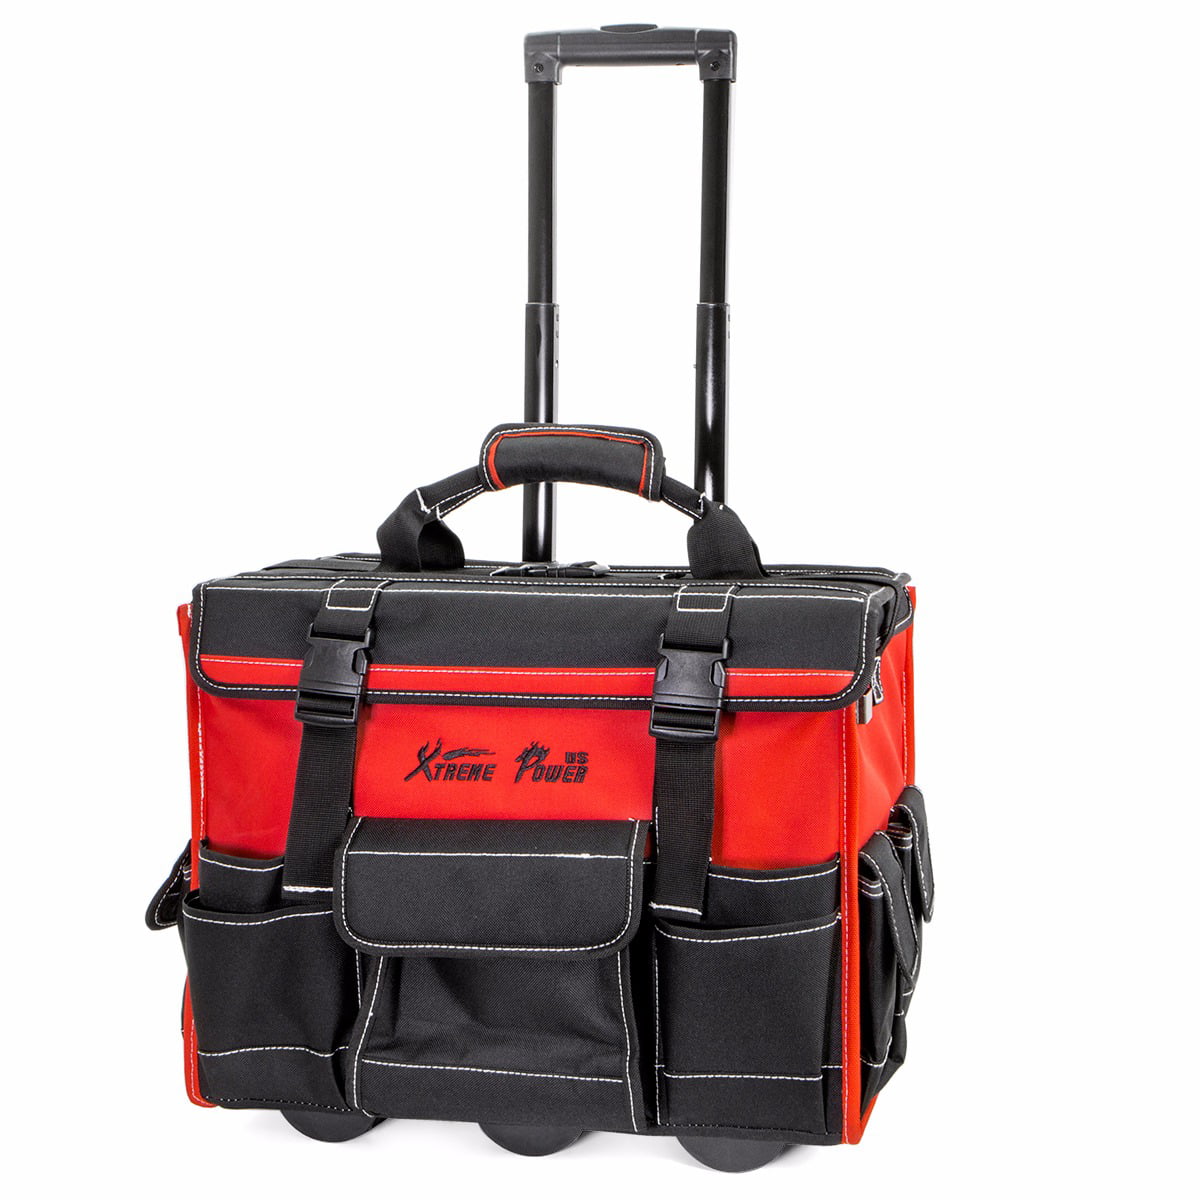 storage case New Heavy duty mobile rolling tool bag on wheels with pockets 